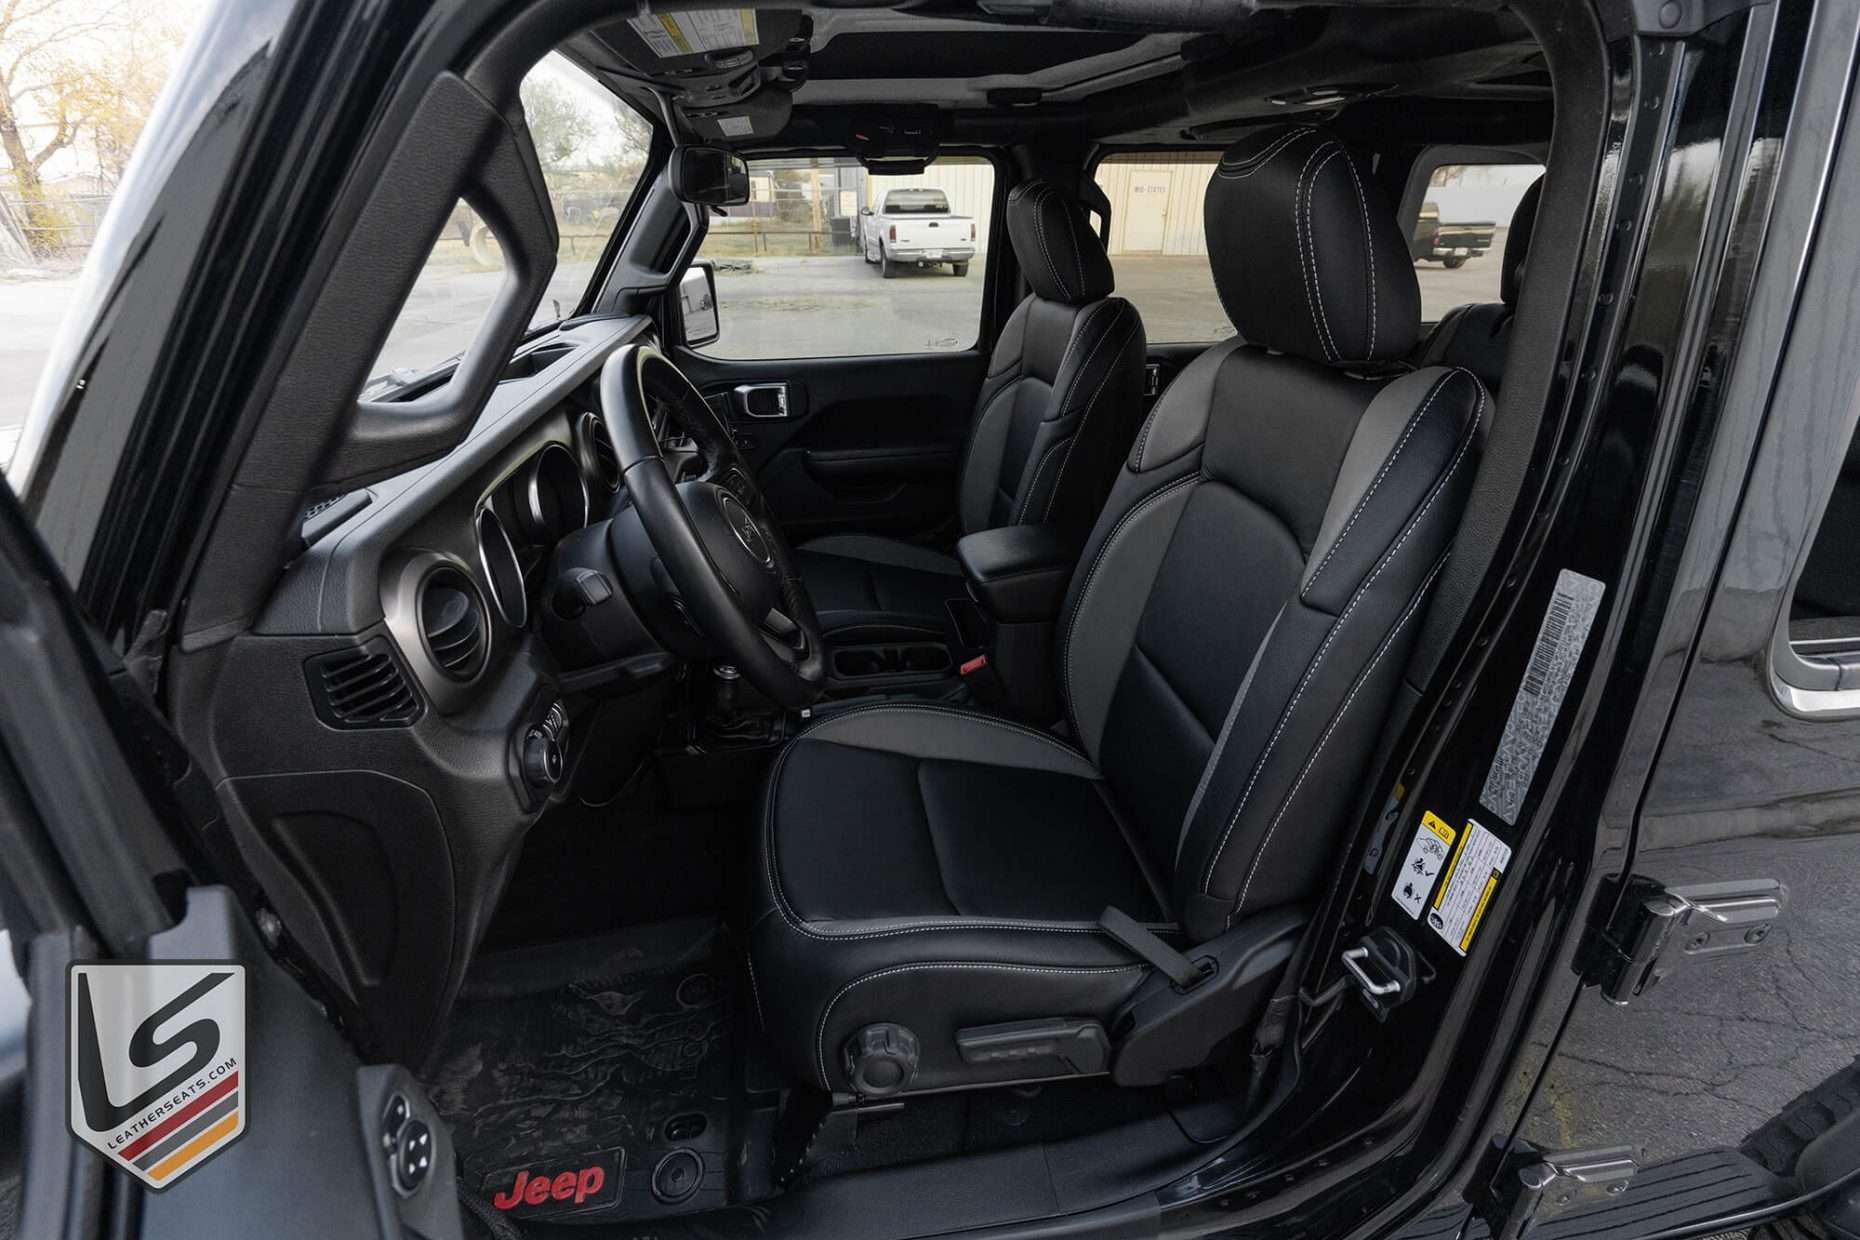 Alternate view of Wrangler JL front driver seat